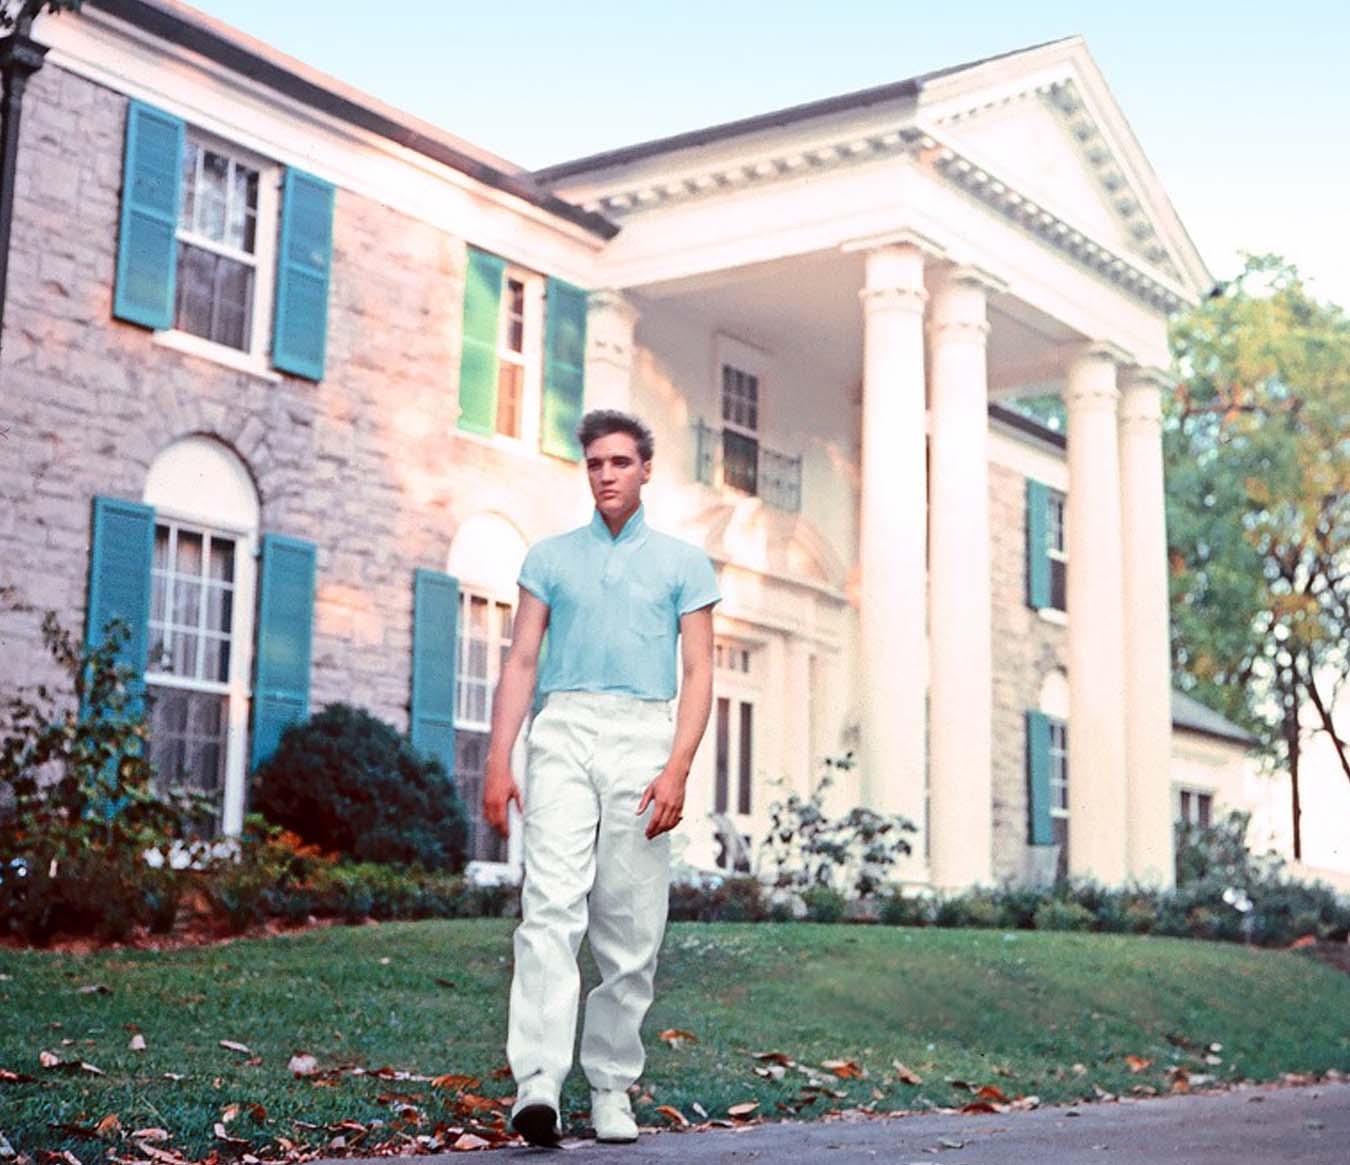 Things to Do in Memphis - Graceland